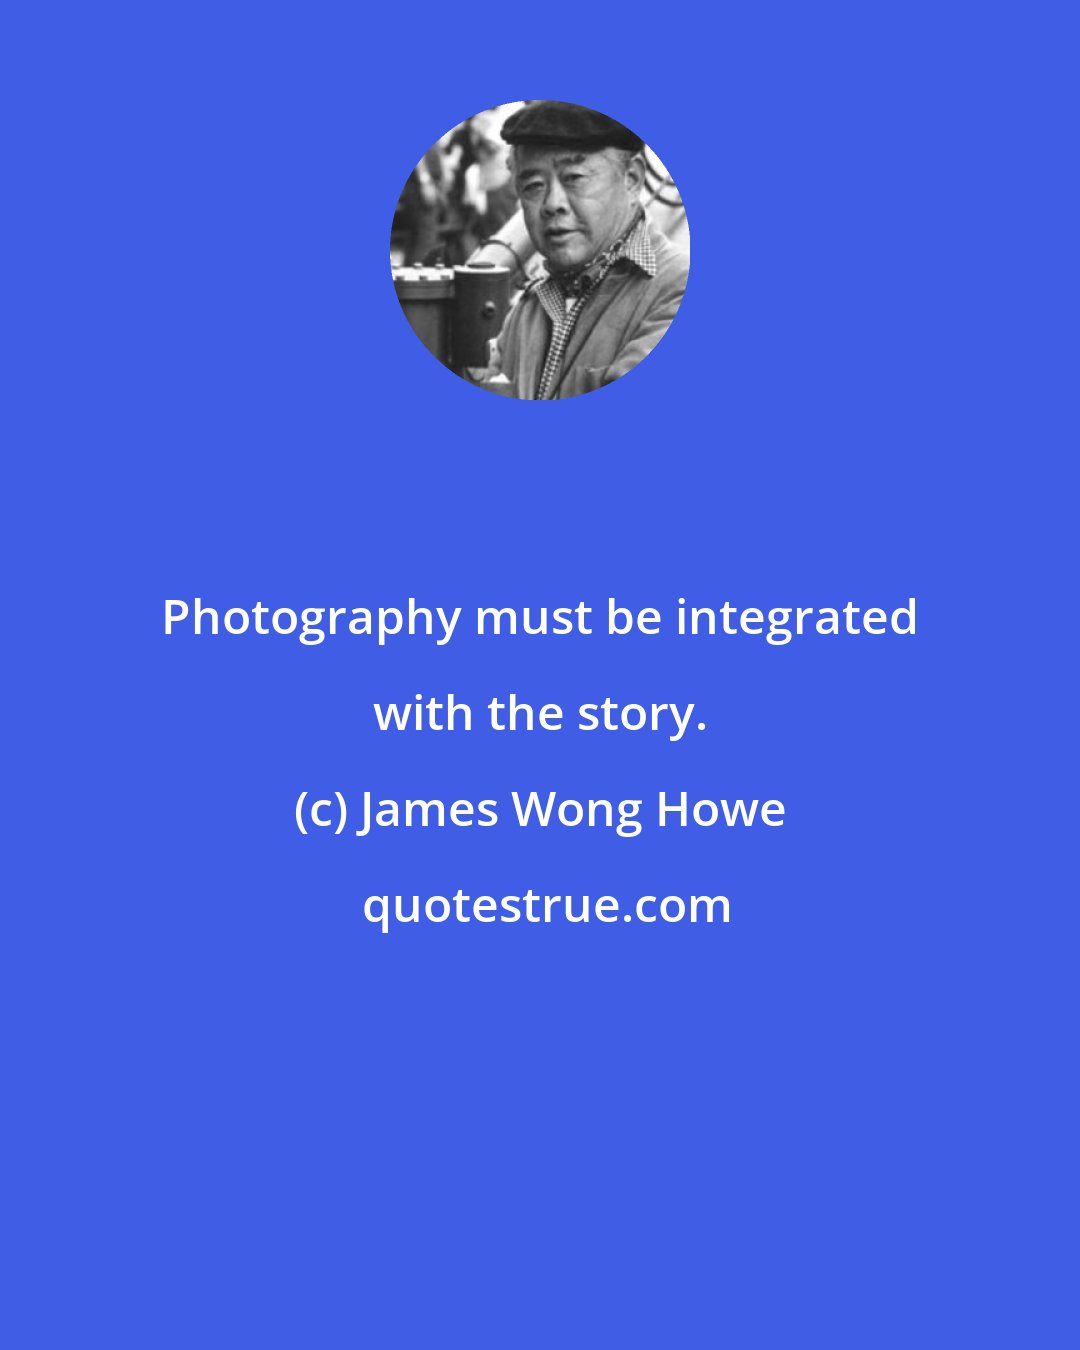 James Wong Howe: Photography must be integrated with the story.